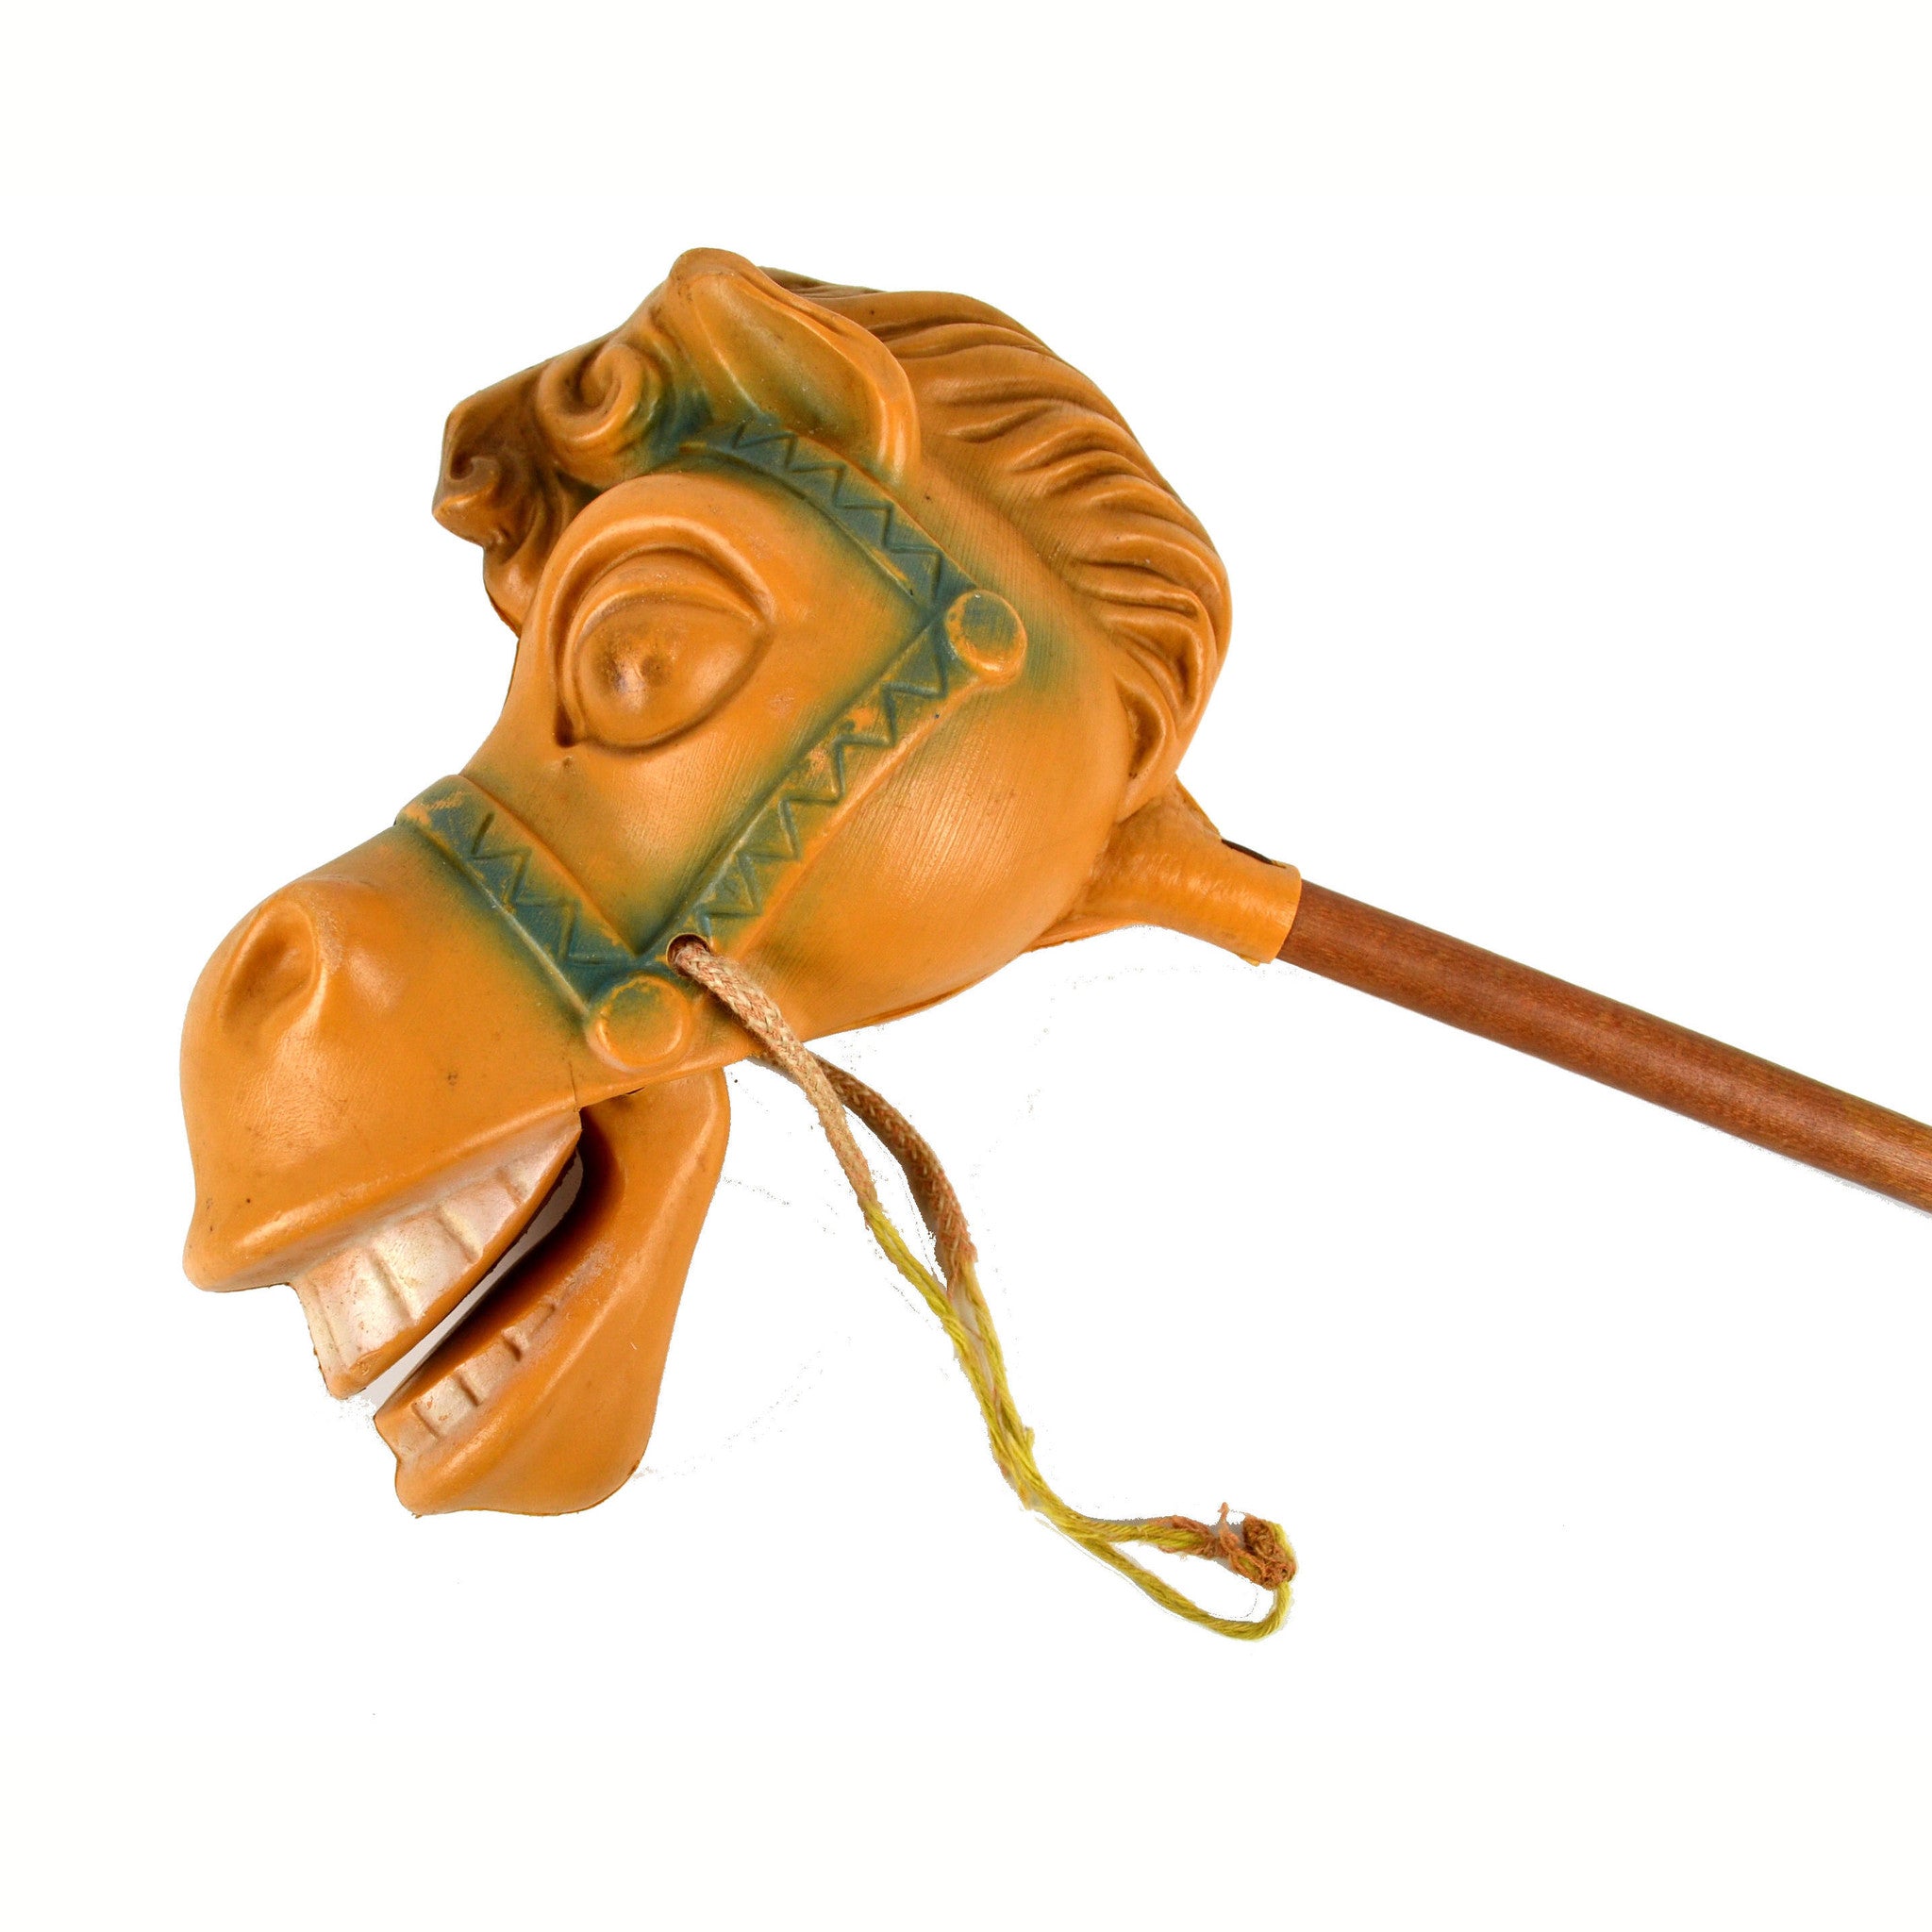 ride on horse toy stick